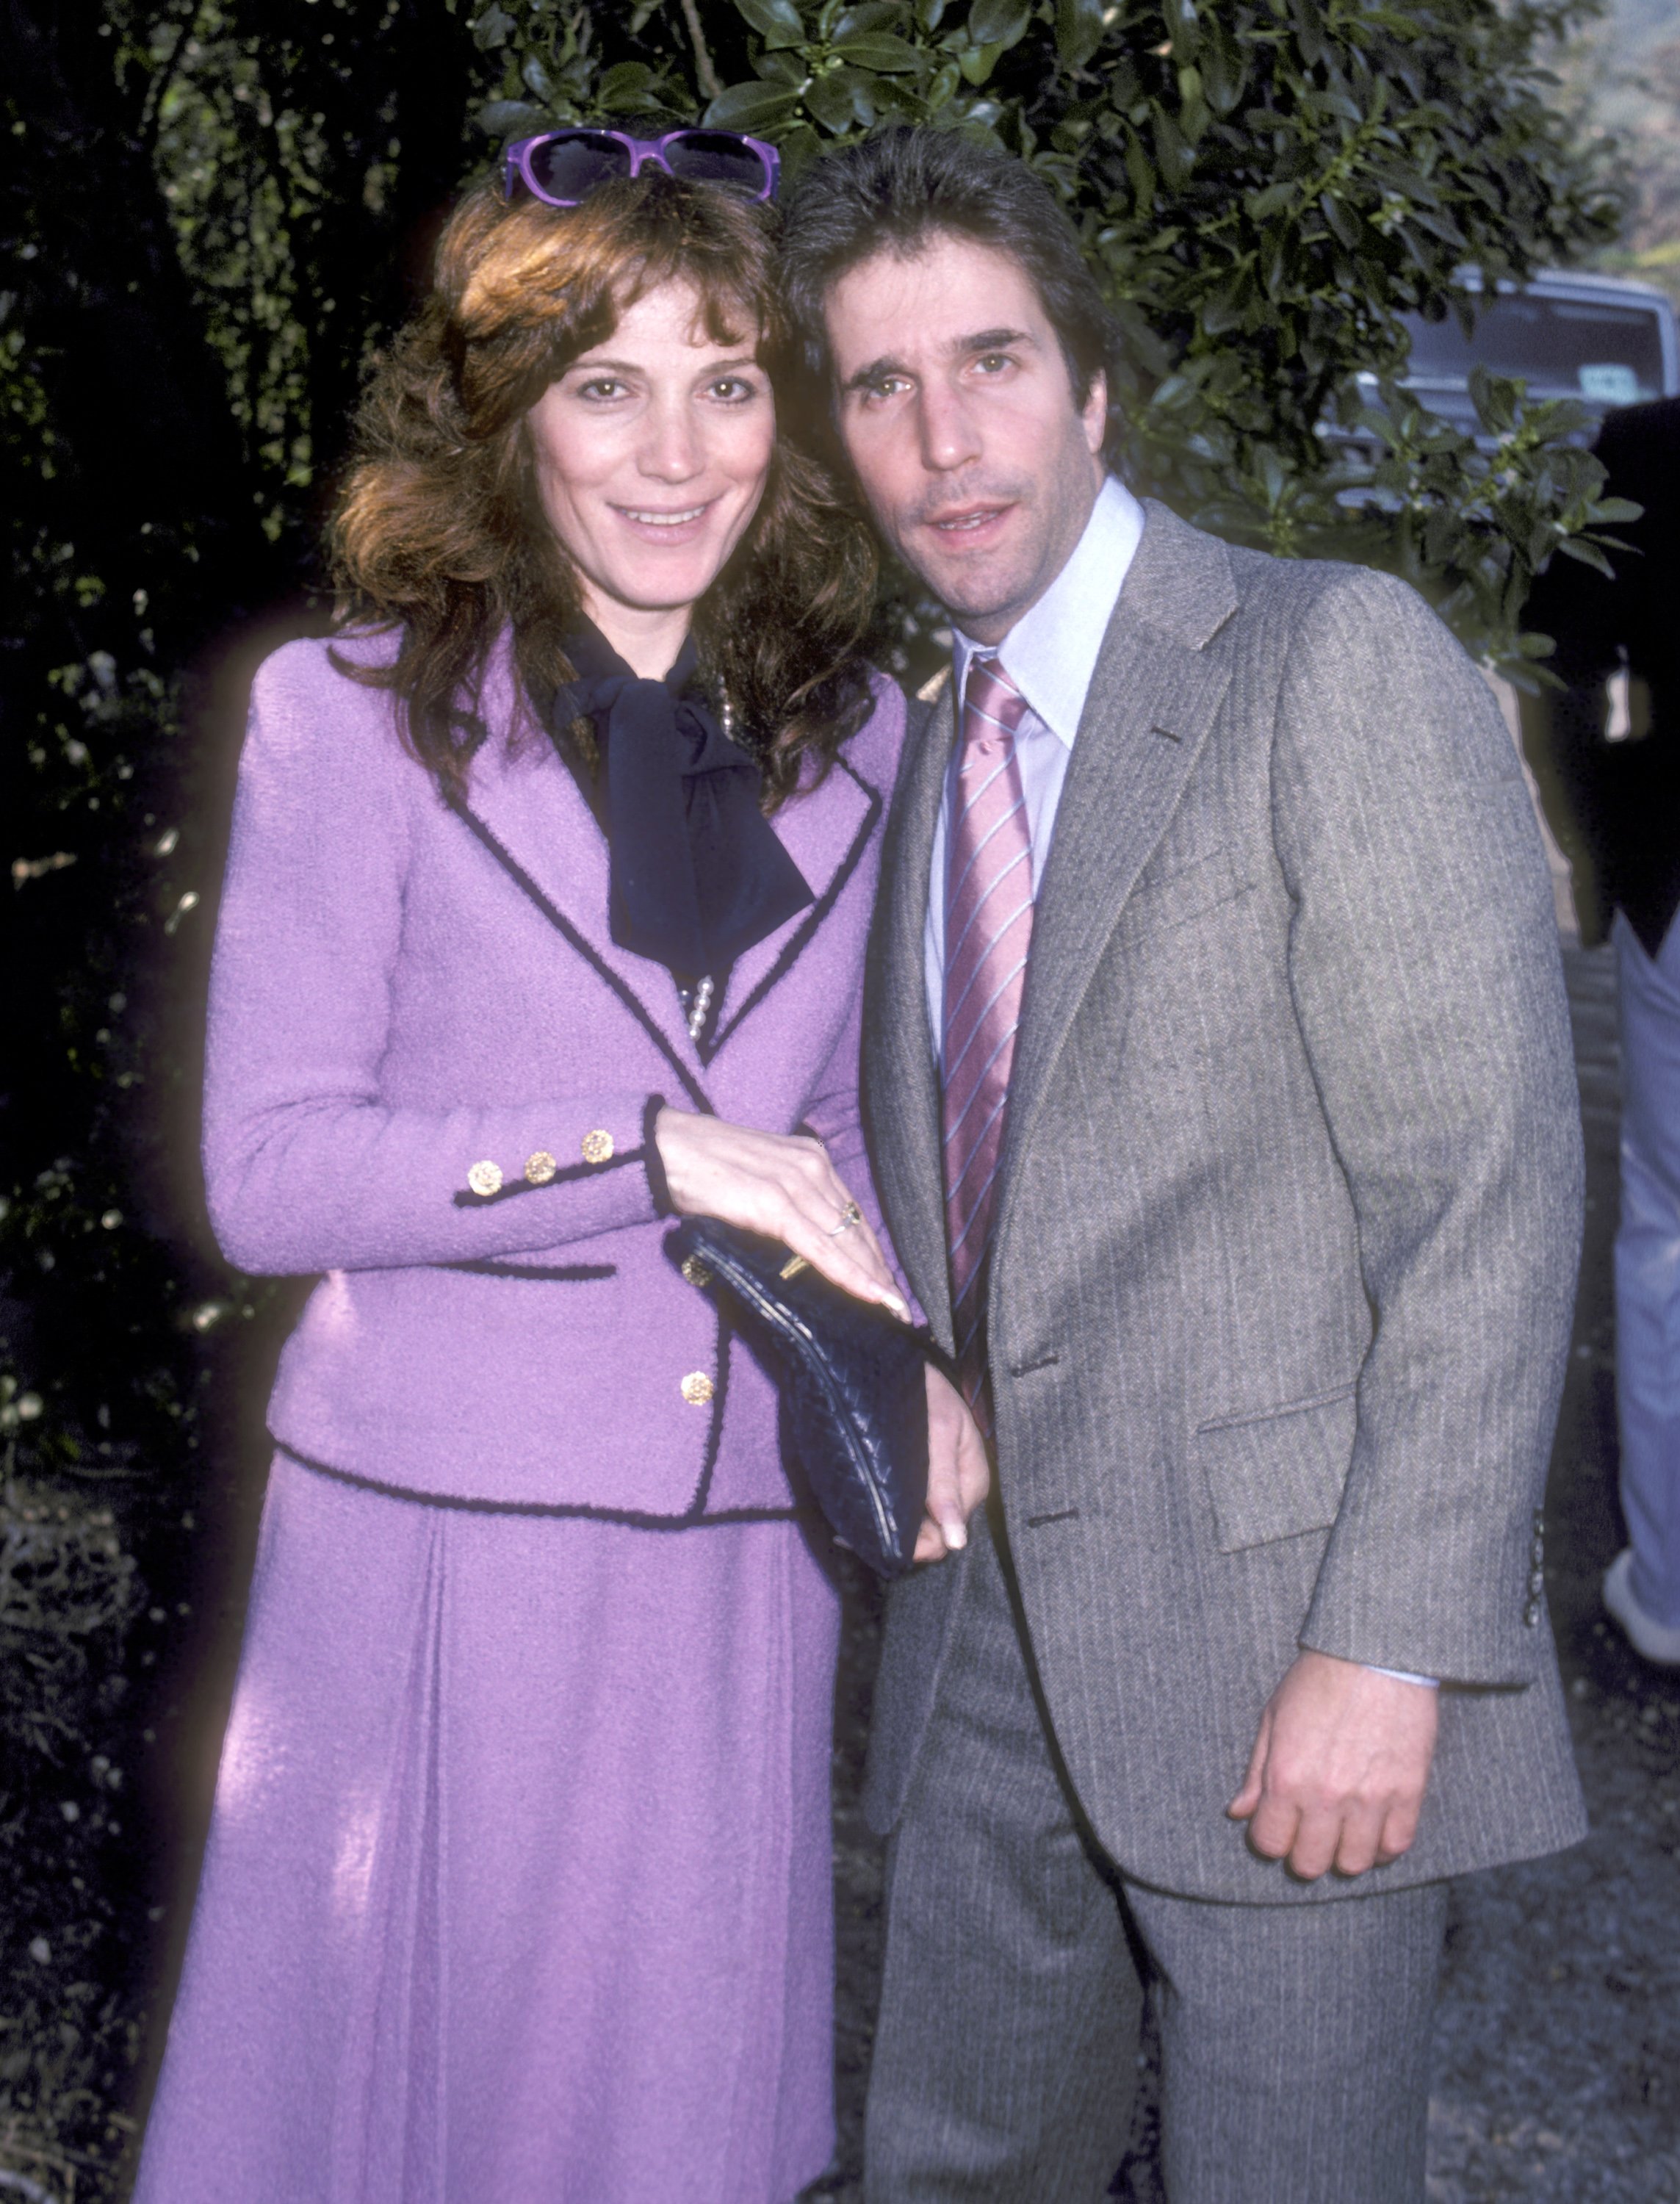 Henry Winkler Is Still Smitten with ‘Beautiful’ Wife Who Had Cancer